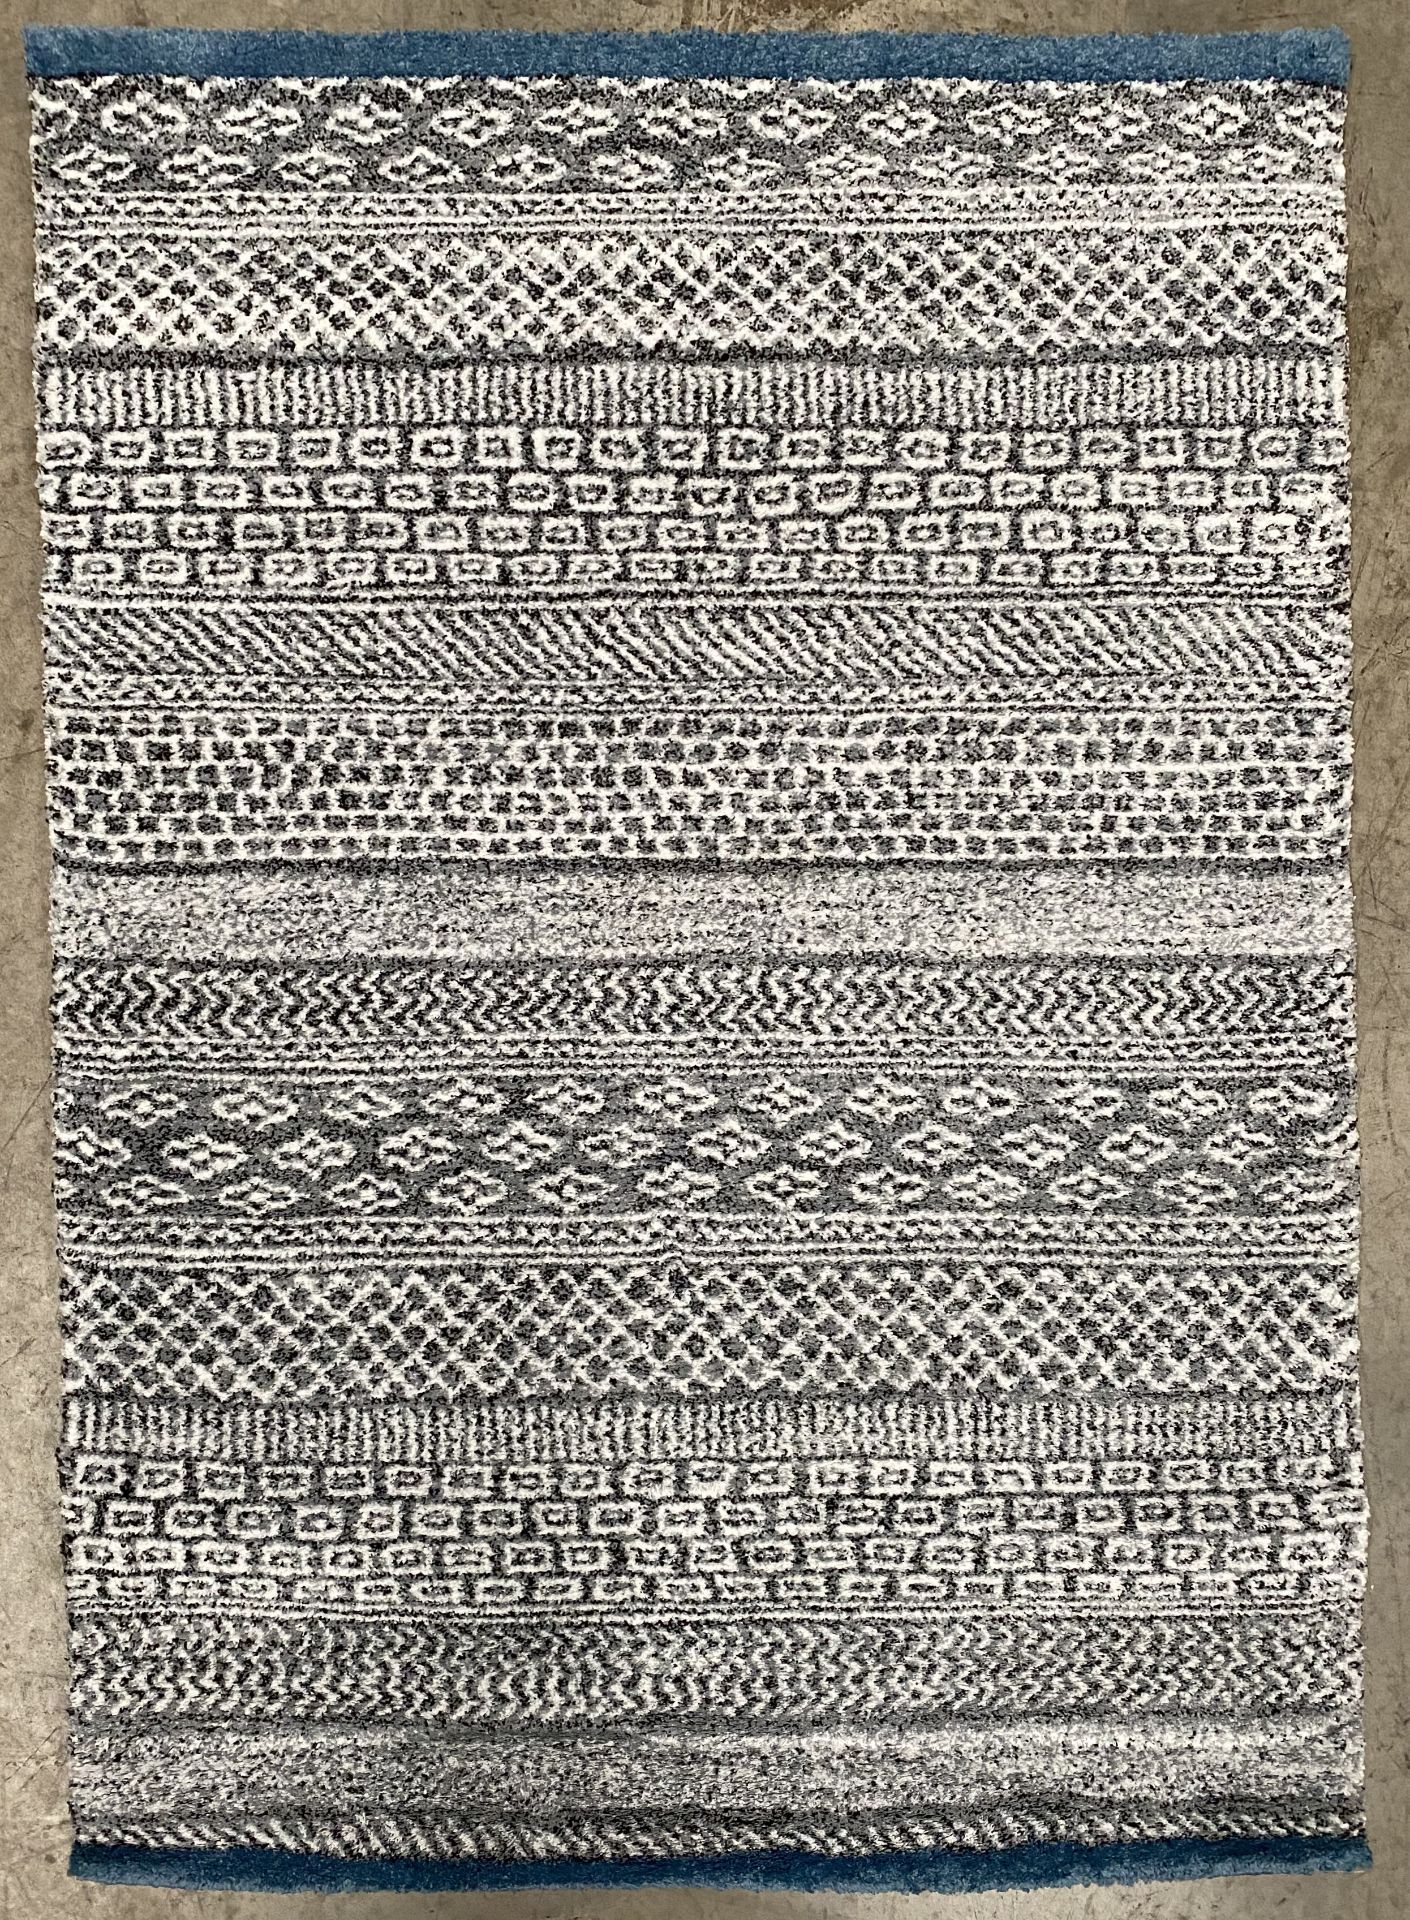 A patterned blue and grey rug - 170cm x 120cm